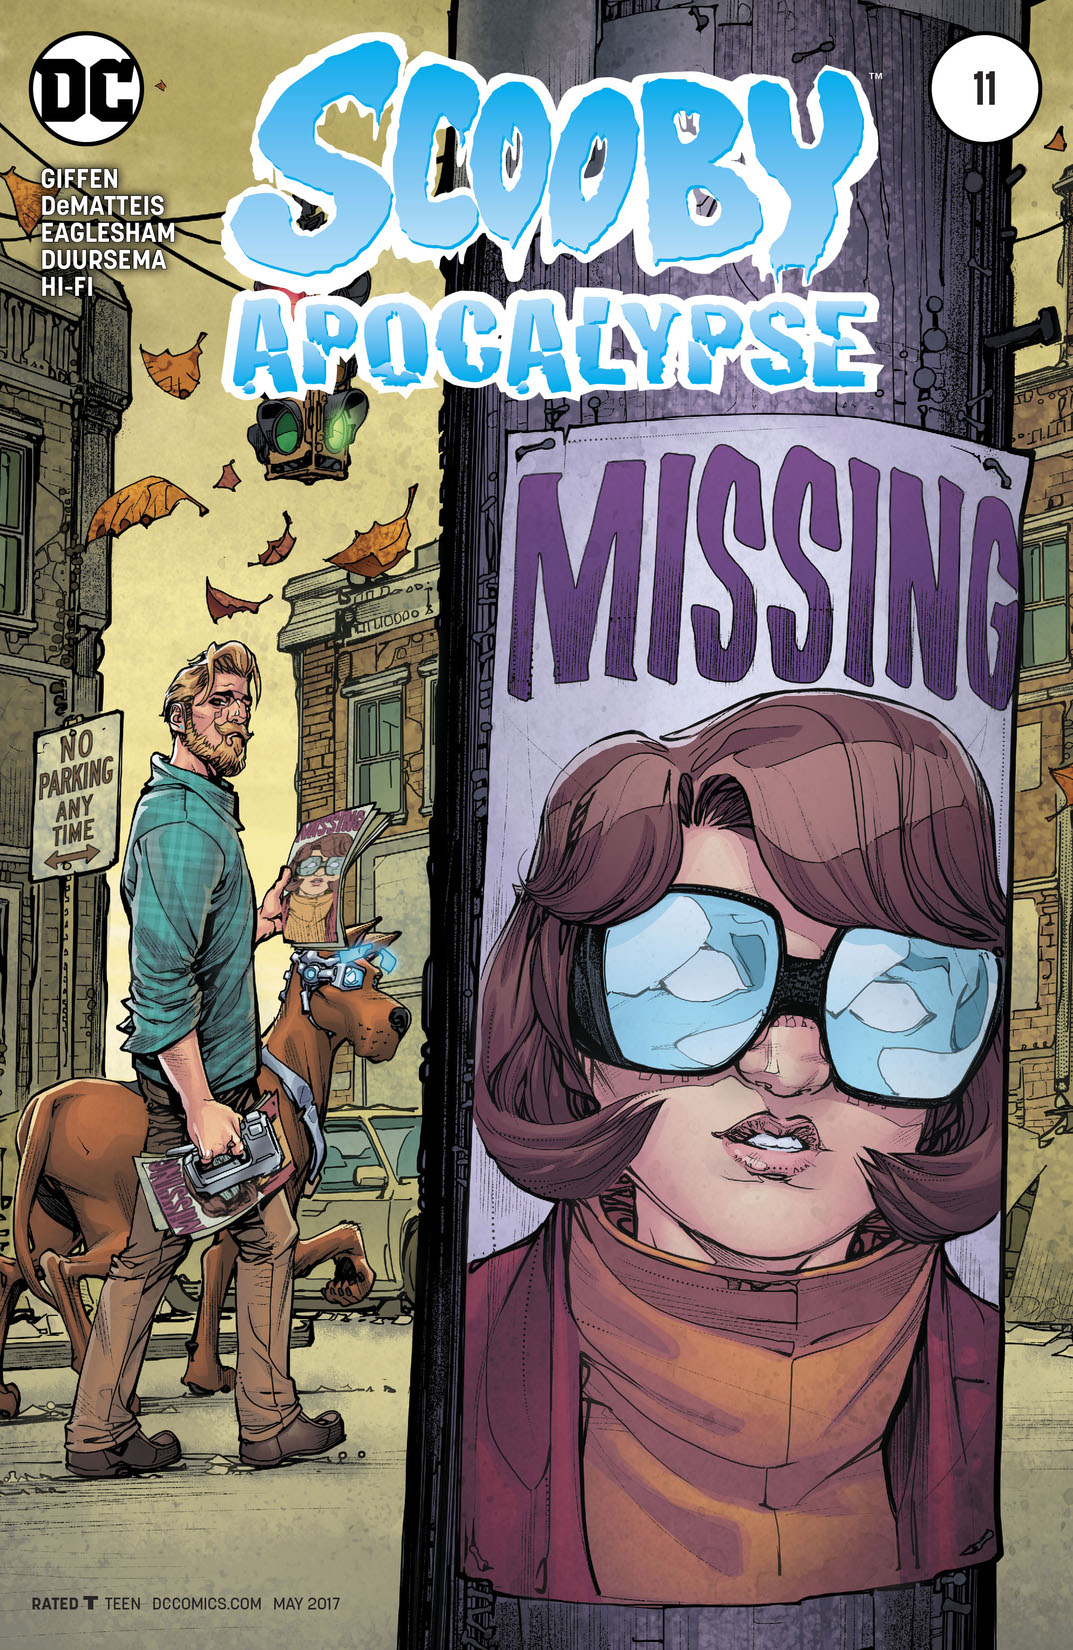 Scooby Apocalypse #11 preview images